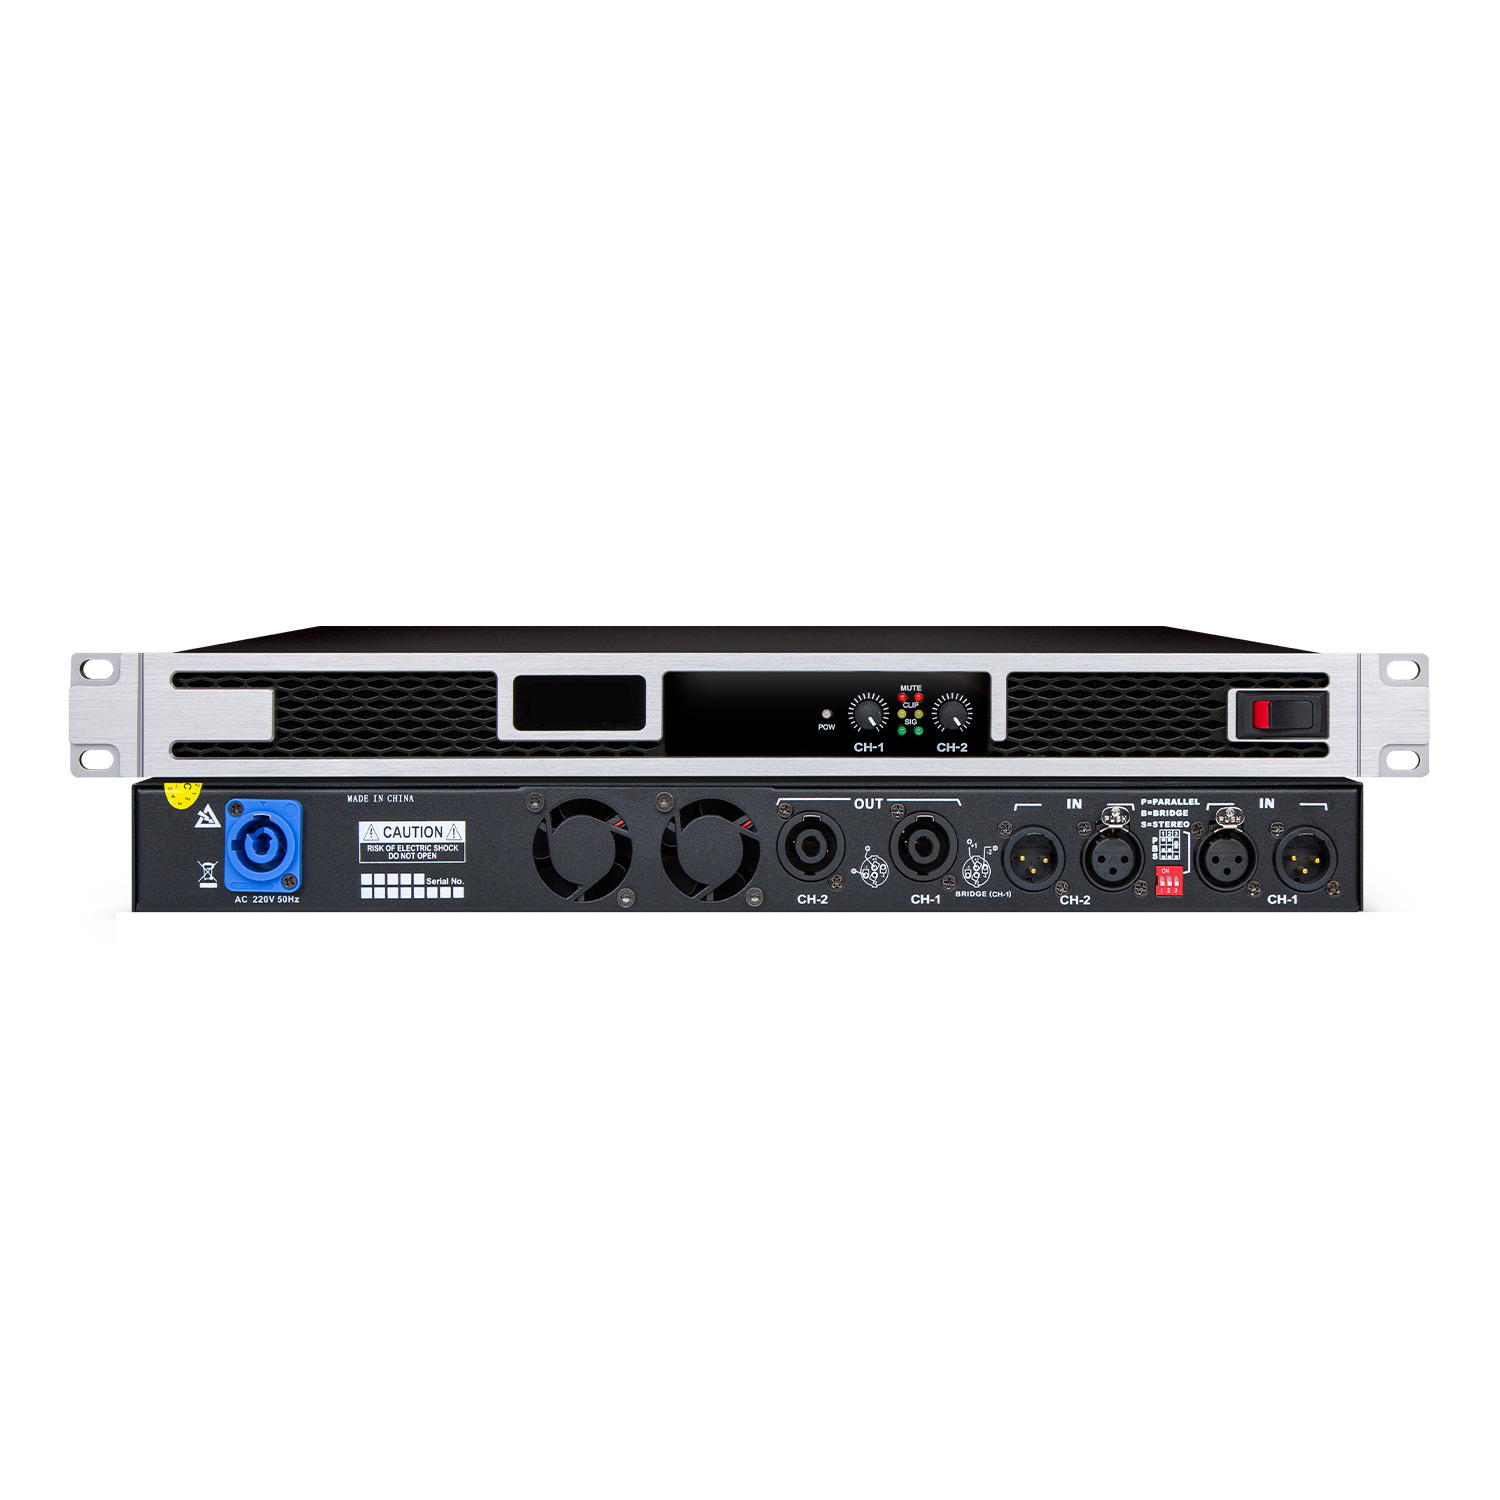 TRAIS TD Series Professional Digital Power Amplifier for Performance Conference